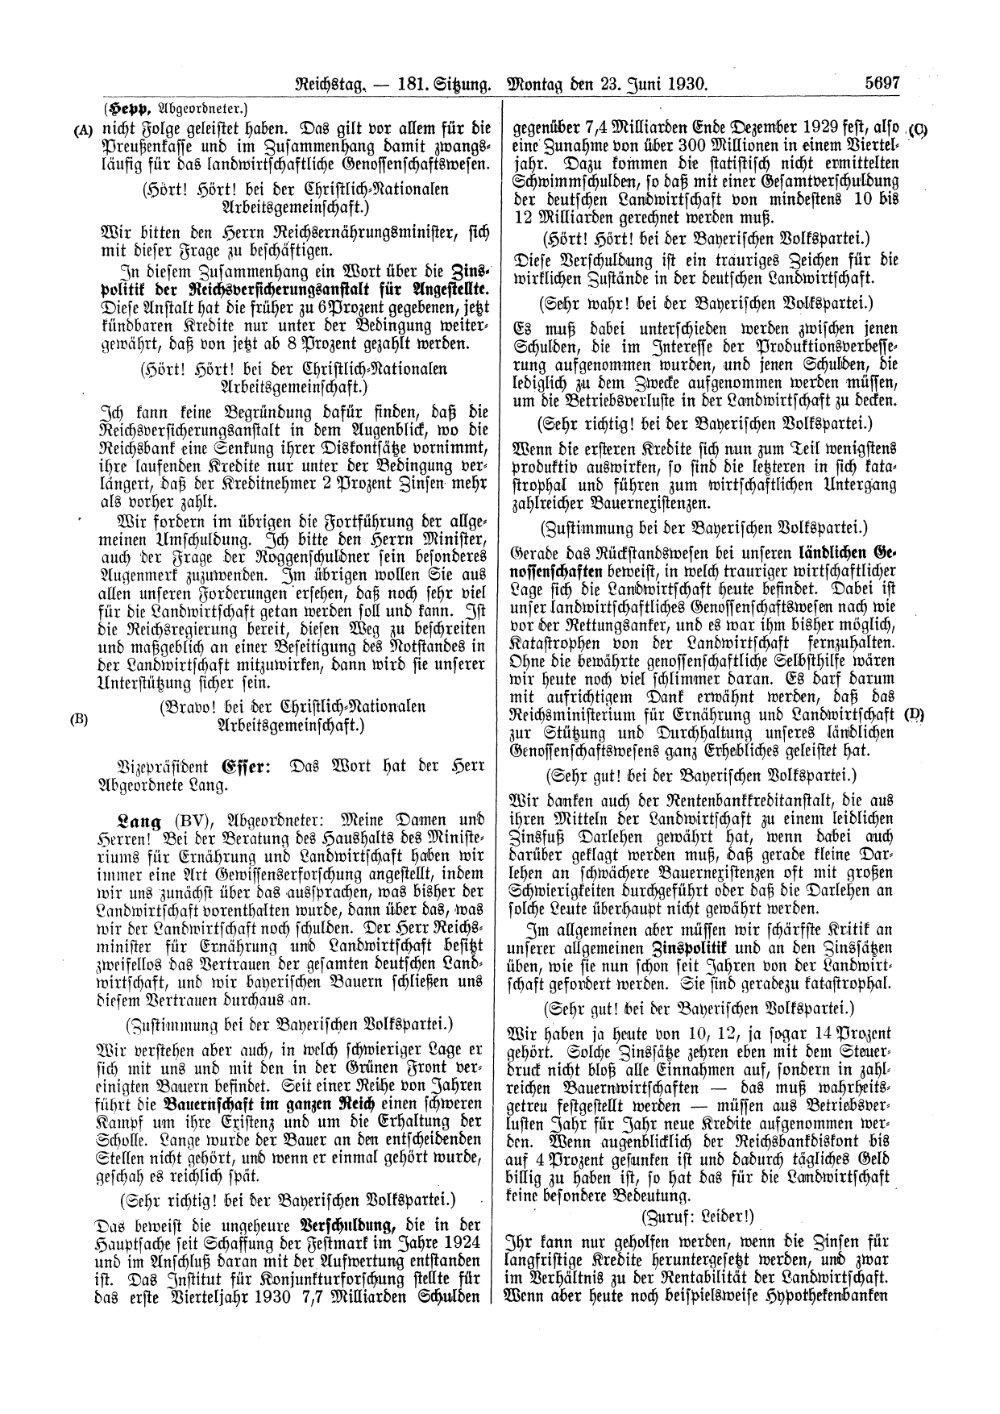 Scan of page 5697